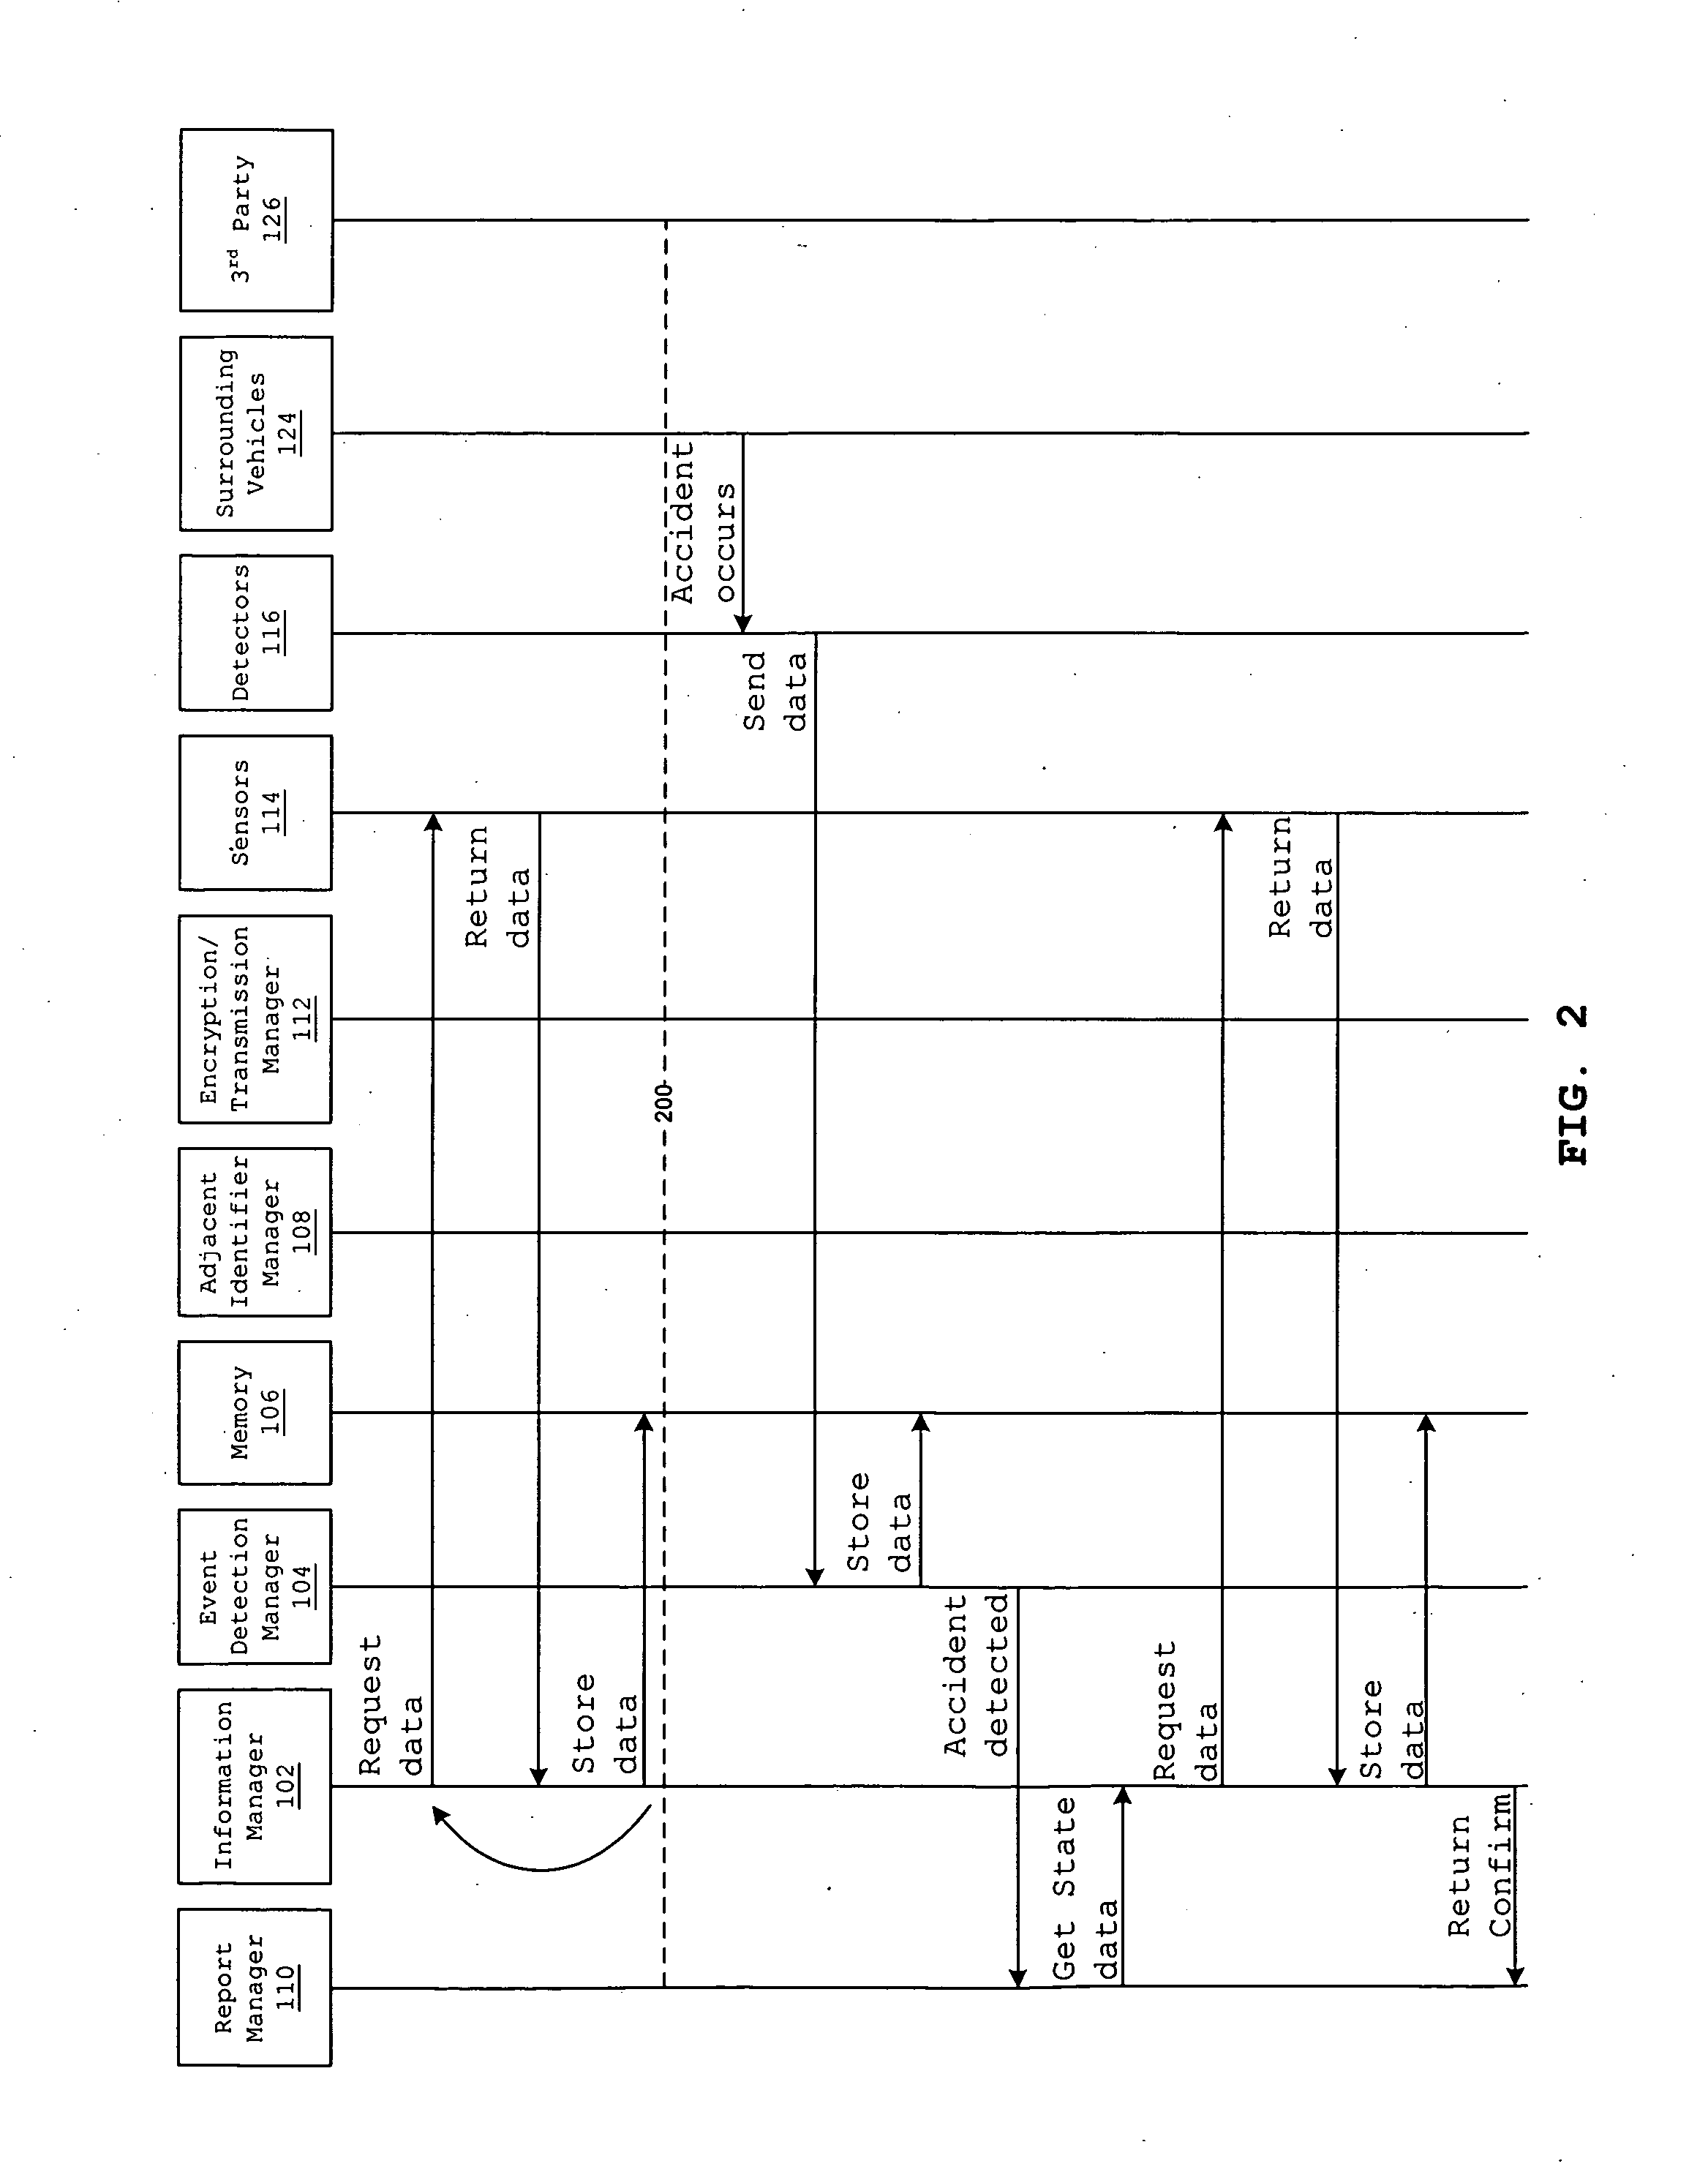 System and method for gathering and submitting data to a third party in response to a vehicle being involved in an accident